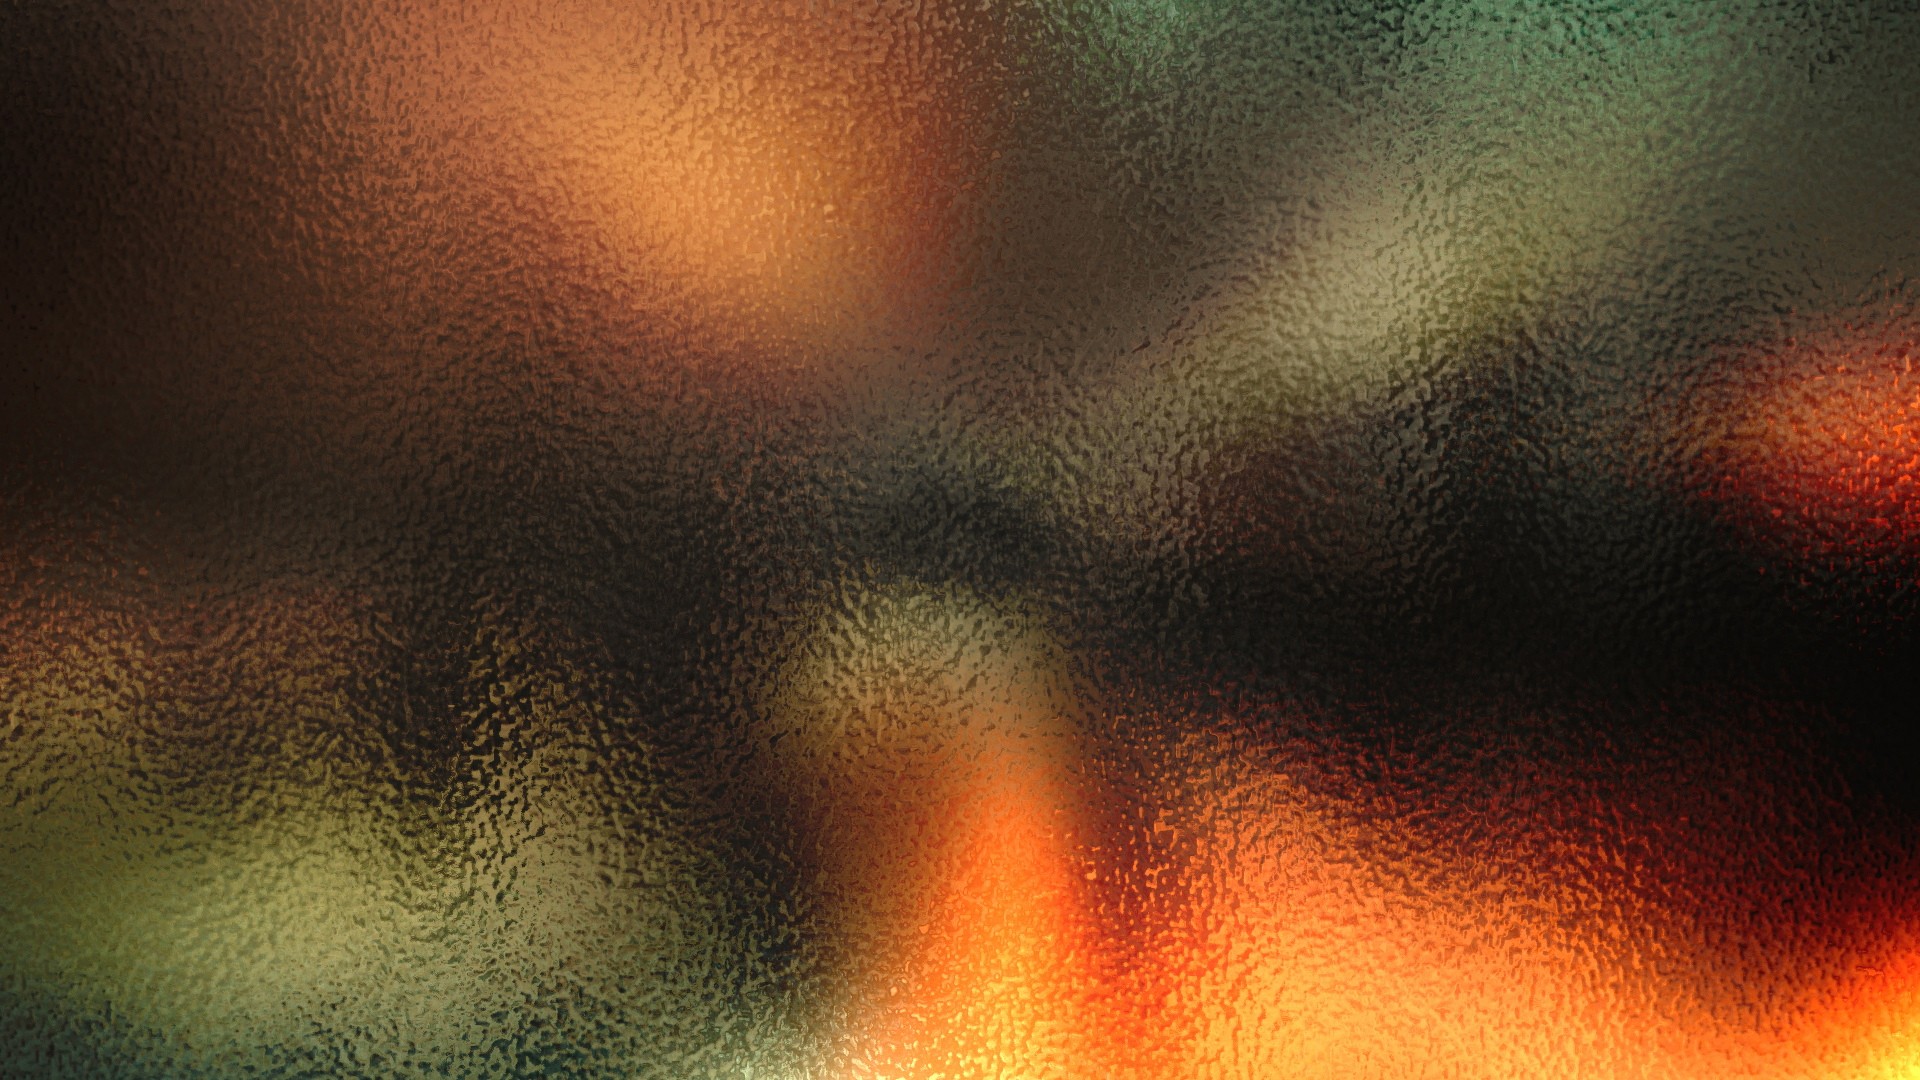 Abstract Blur HD Wallpaper | Background Image